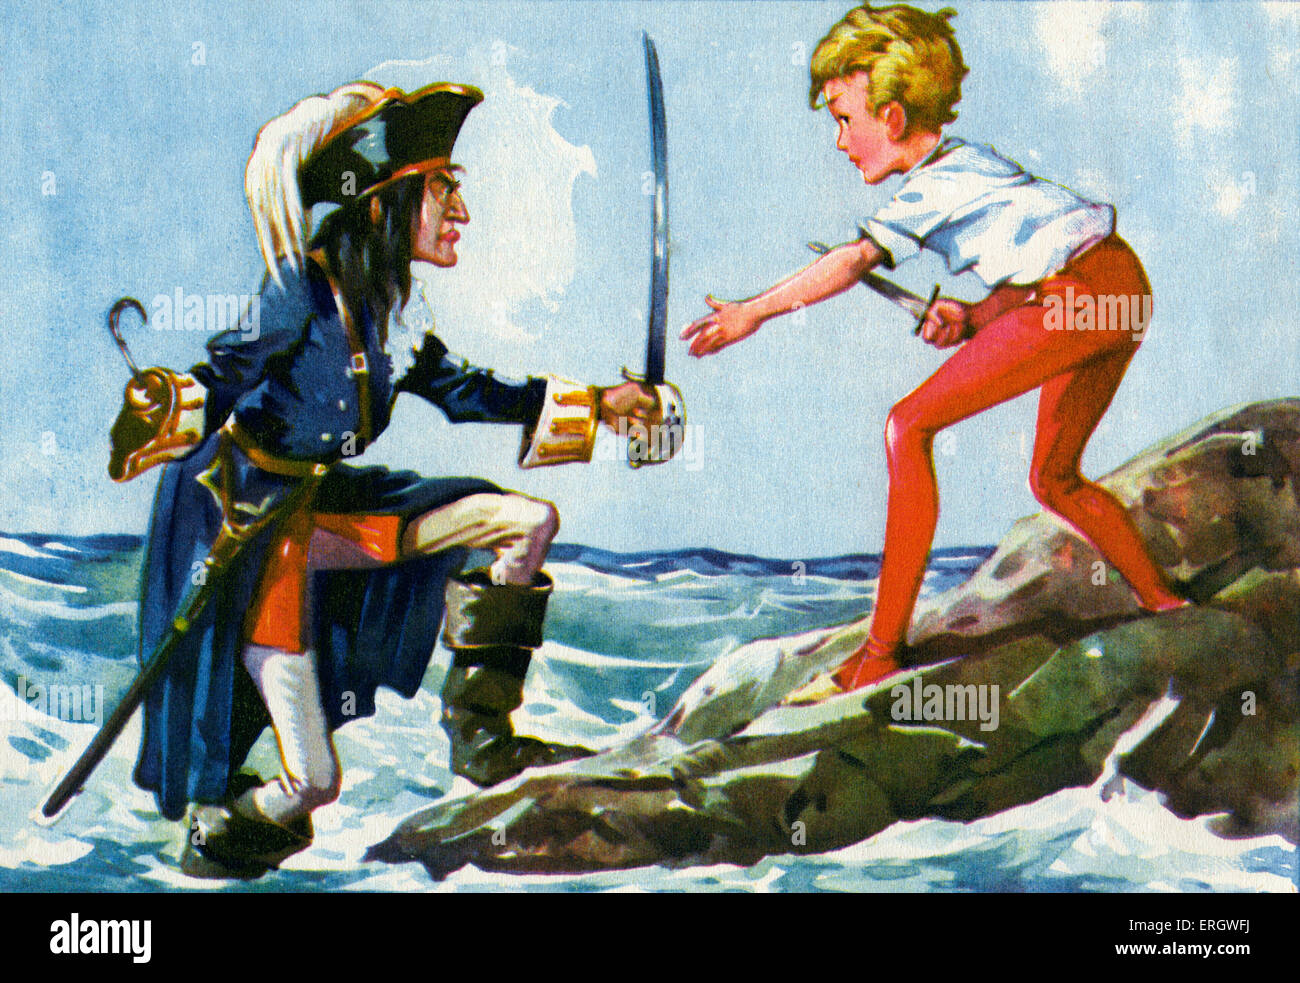 'Peter Pan and Wendy' by James Matthew Barrie. Captain Hook and Peter Pan fight. JMB: Scottish novelist and dramatist, 9 May Stock Photo